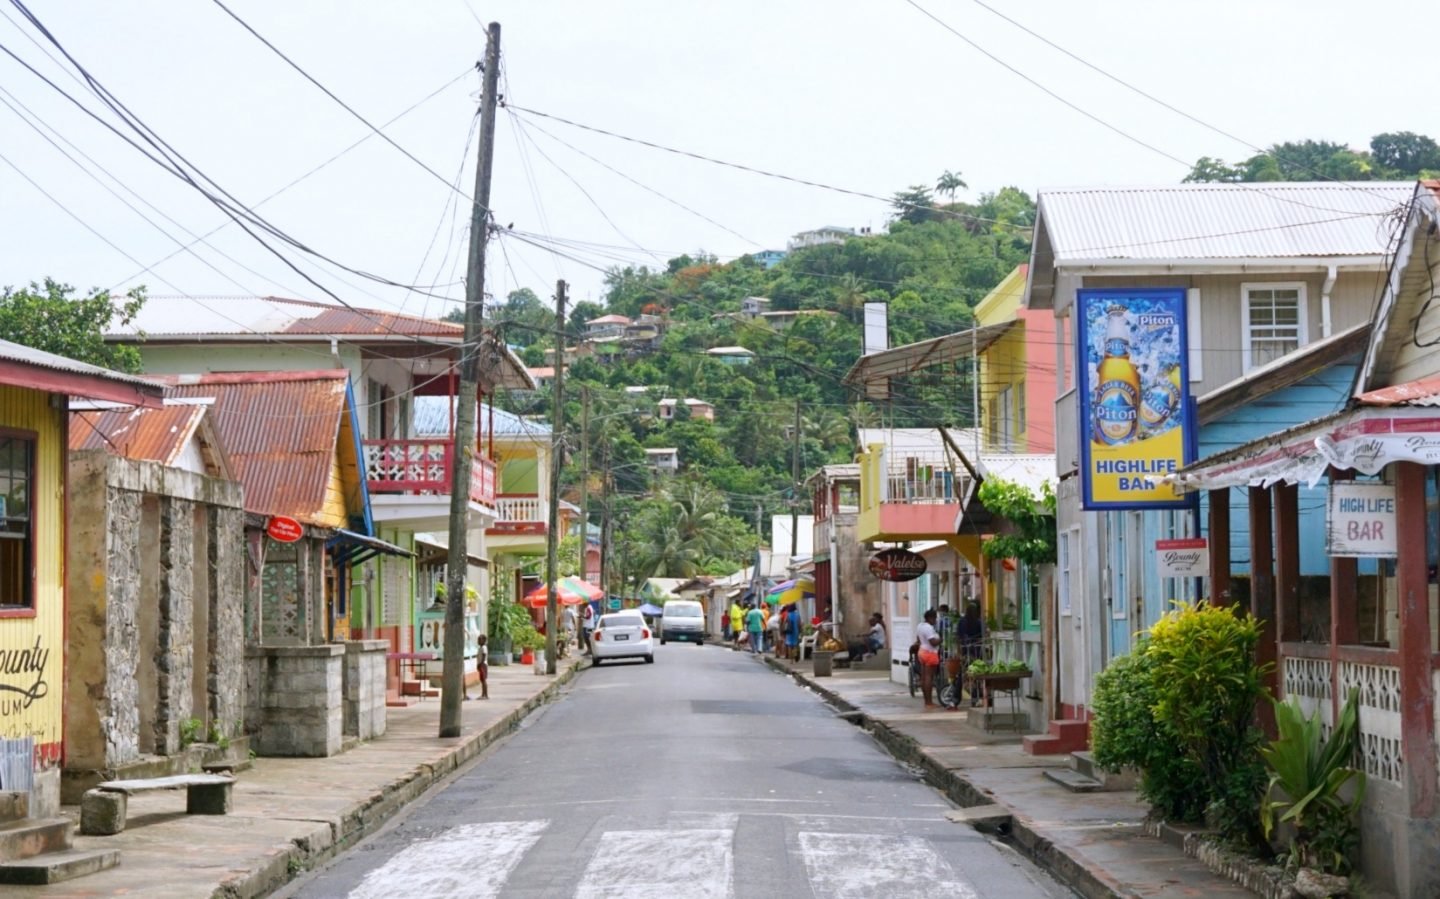 streets of st lucia www.extraordinarychaos.com